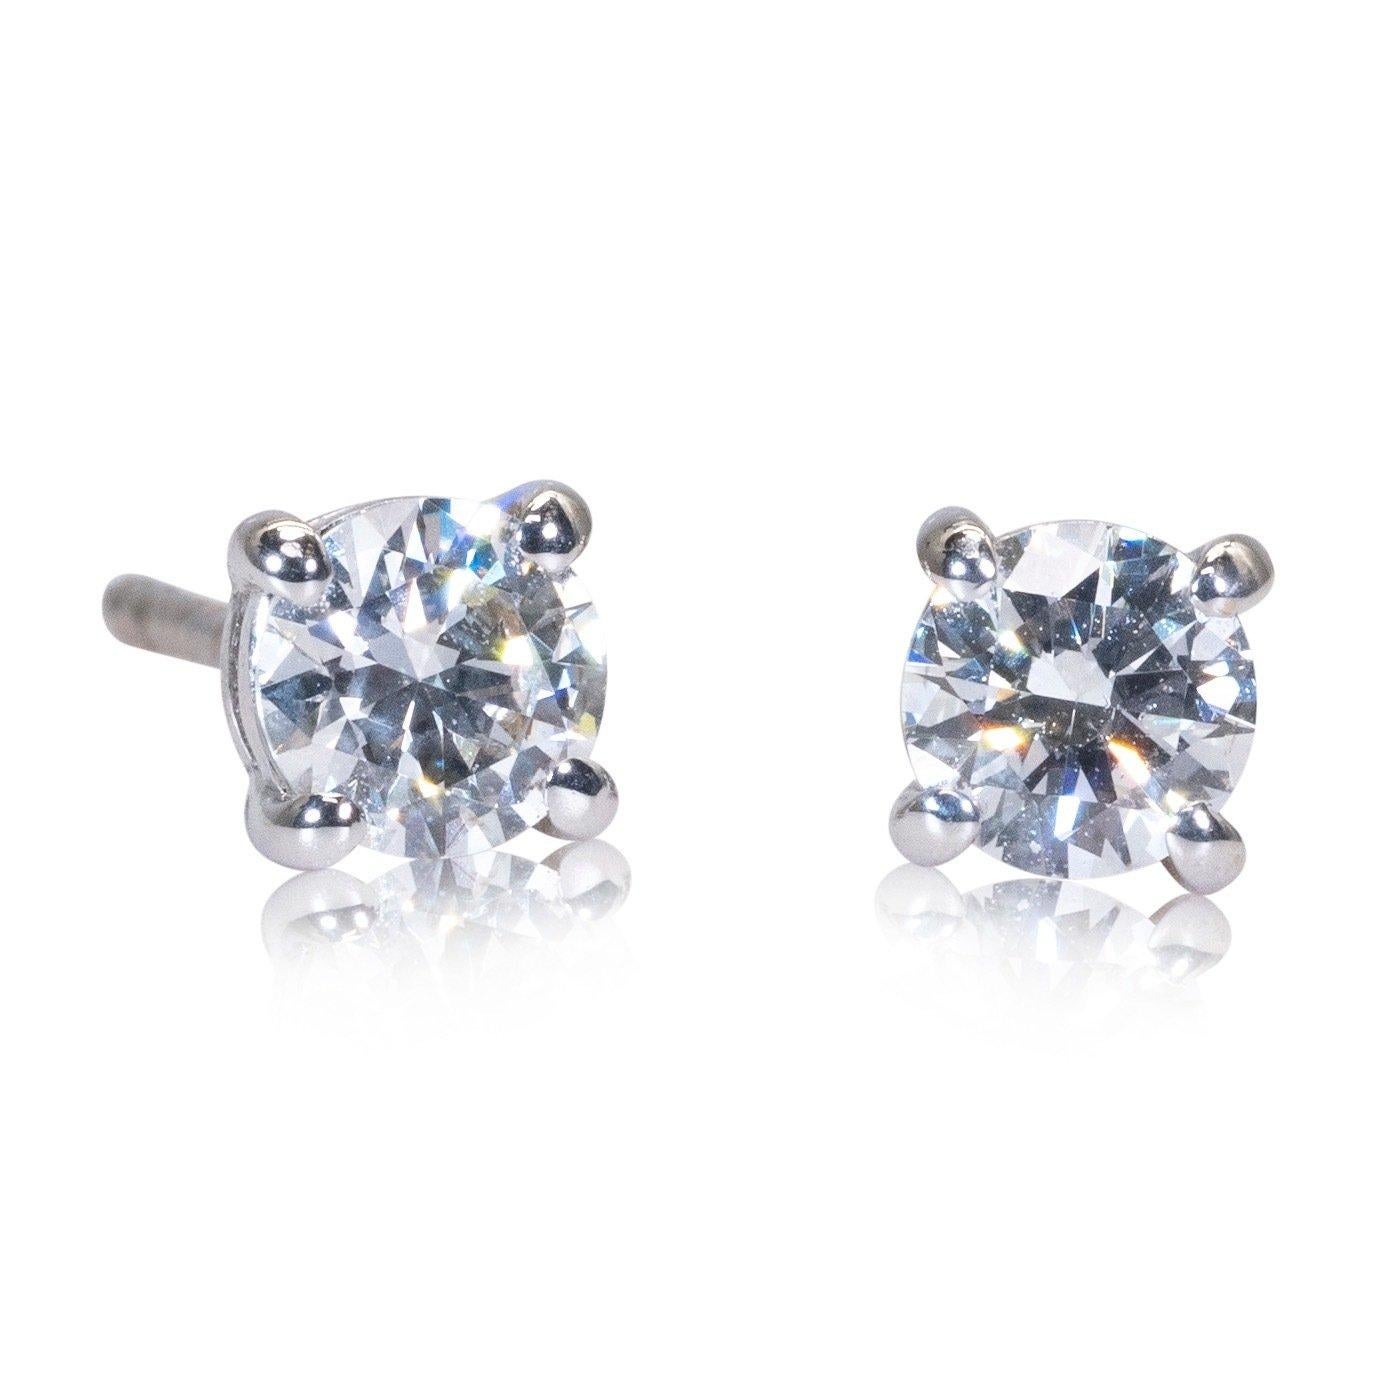 Round Cut Sparkling 18K White Gold Stud Earrings with 0.31 ct Natural Diamonds, GIA Cert For Sale